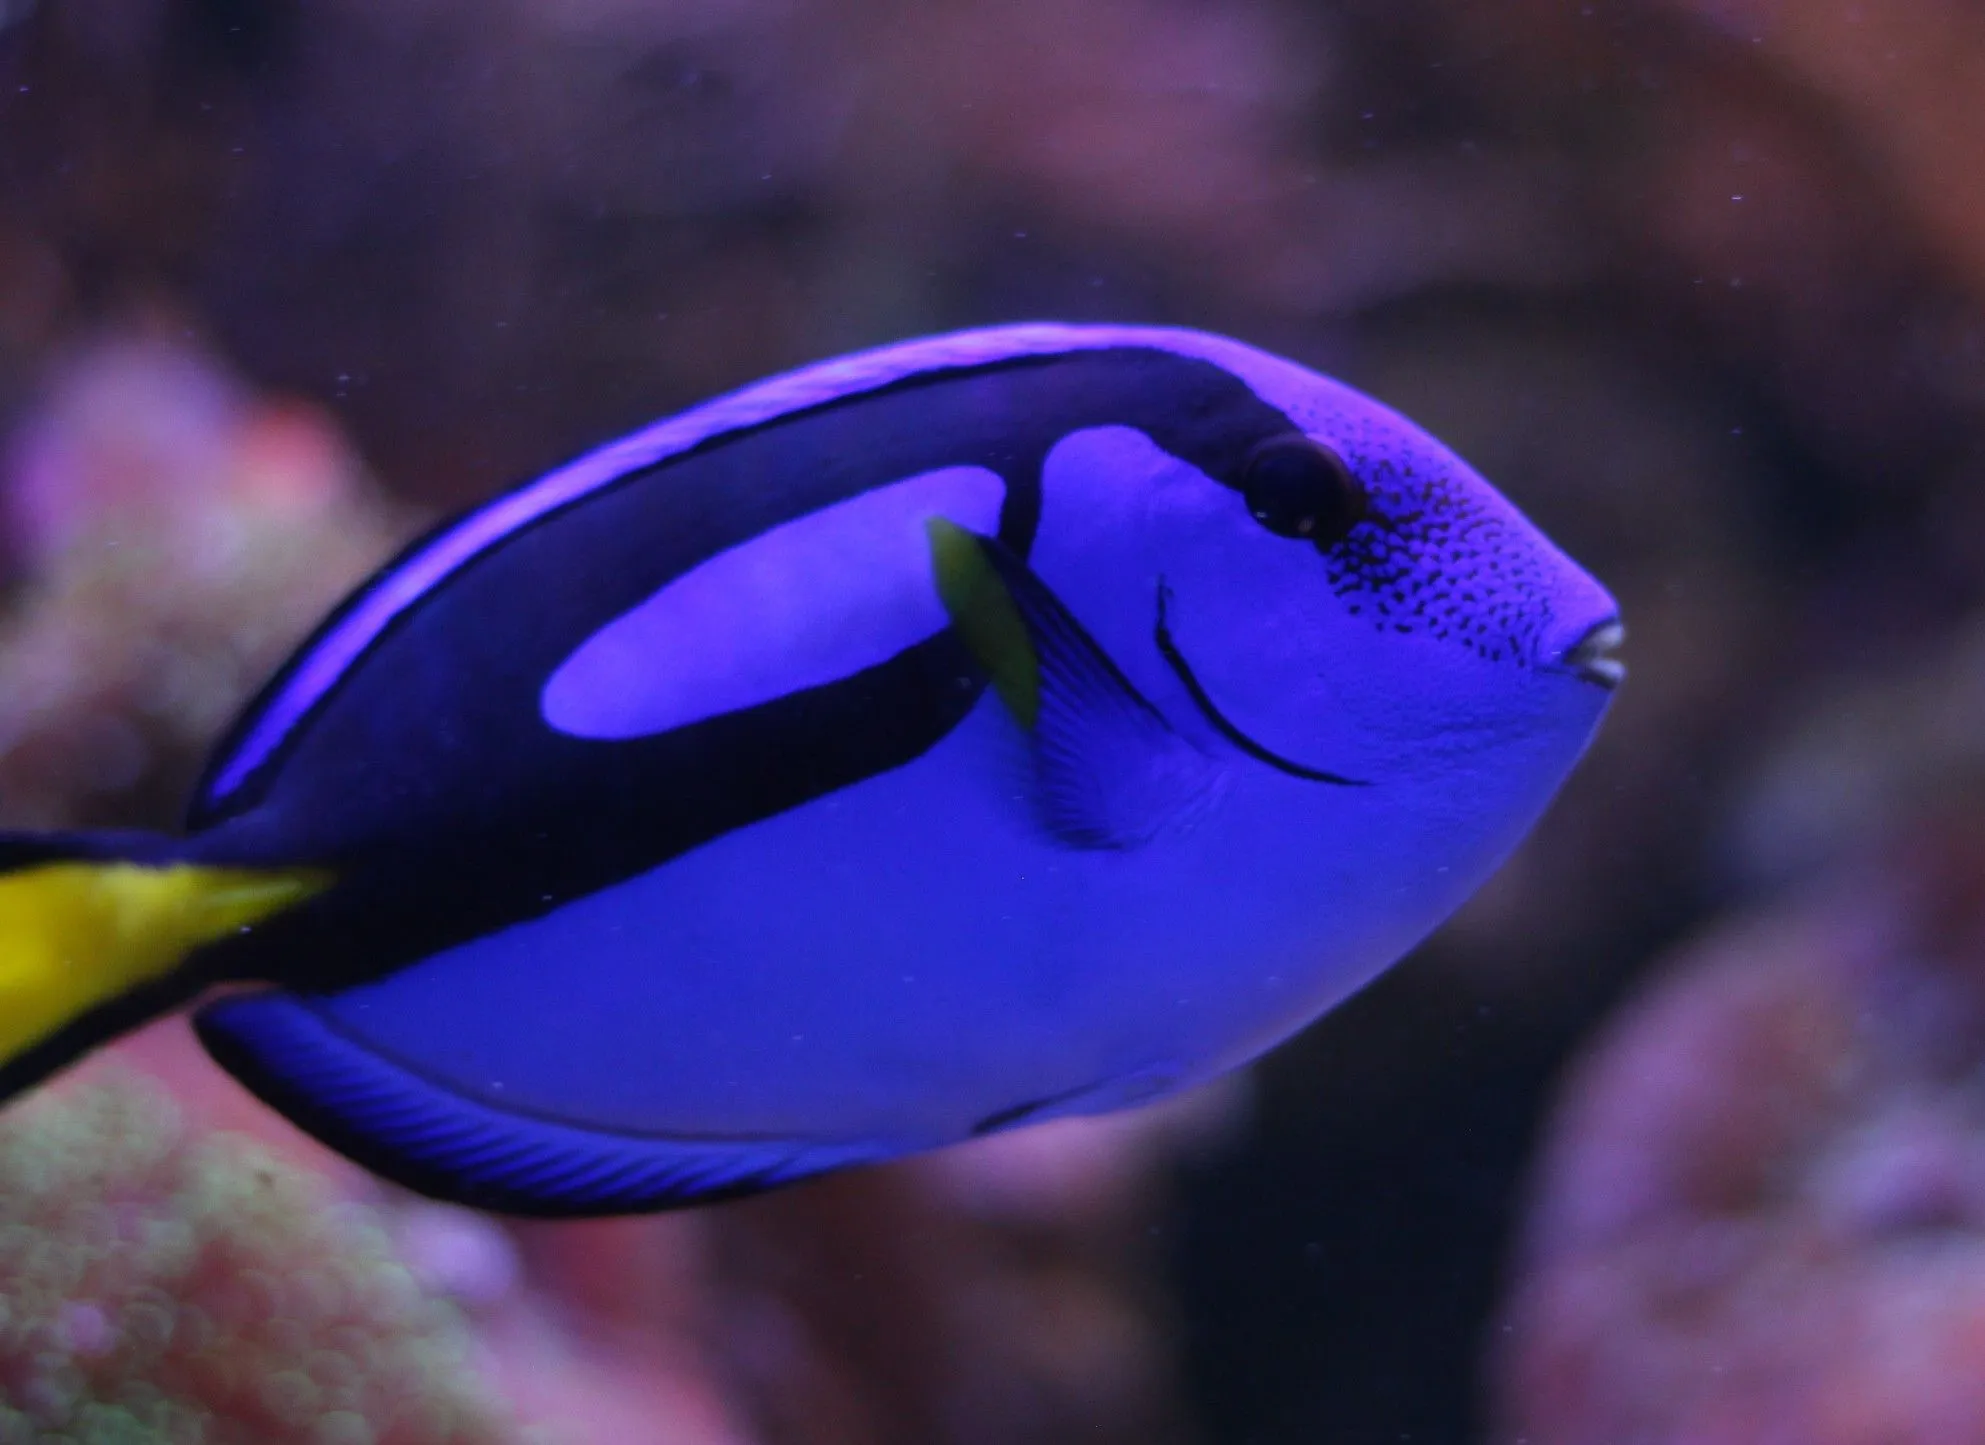 The White Tail Bristletooth Tang is extremely beautiful.